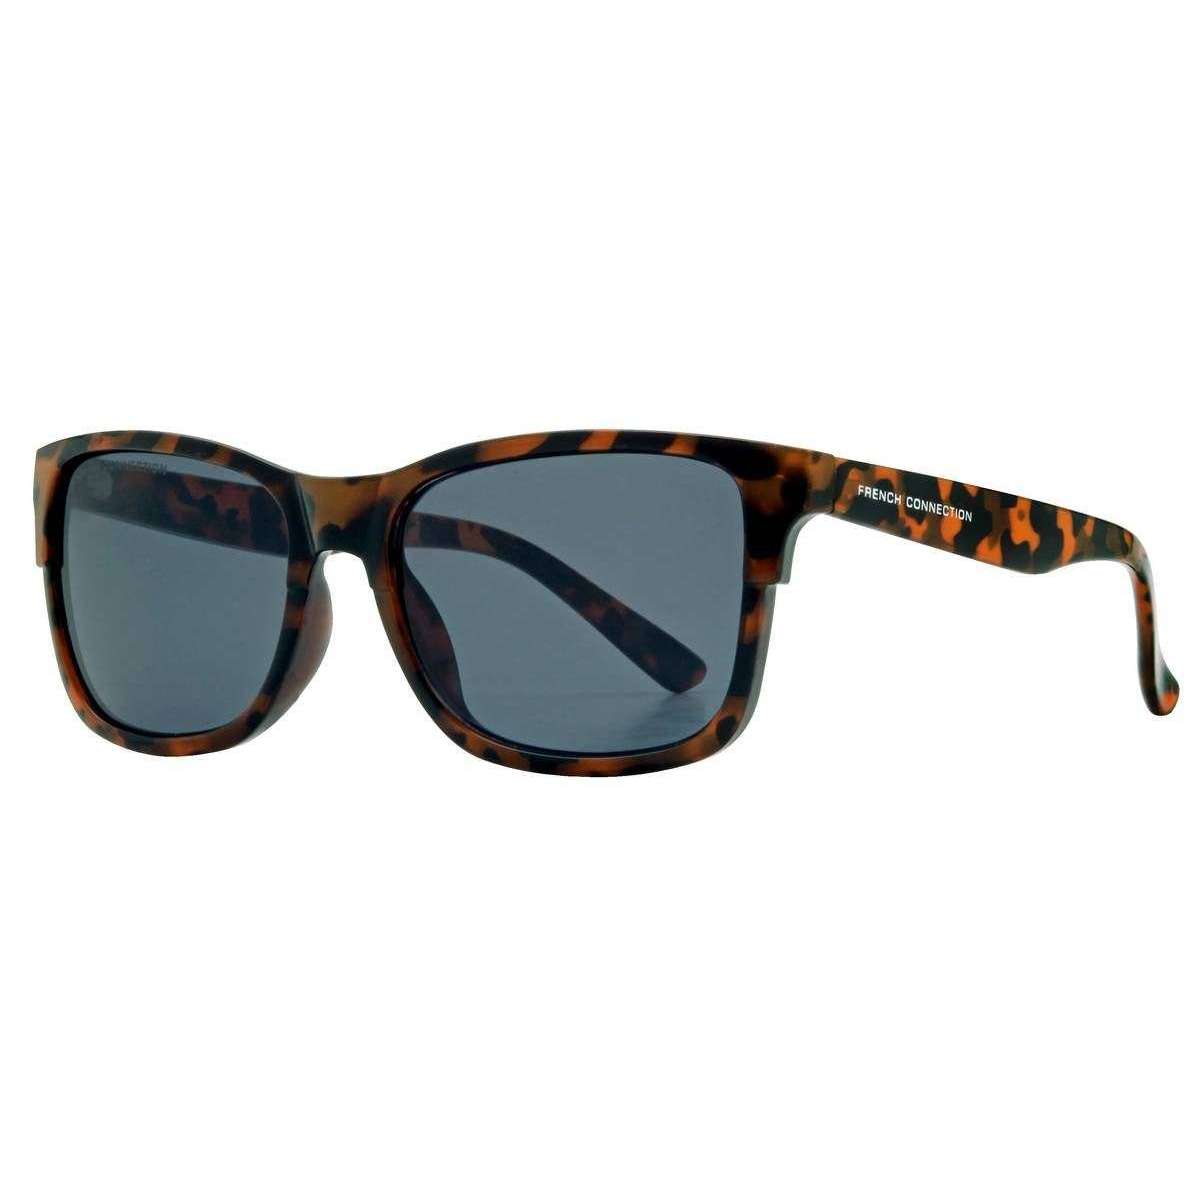 French Connection Rectangle Classic Sunglasses - Classic Tortoise Shell/Smoke Grey